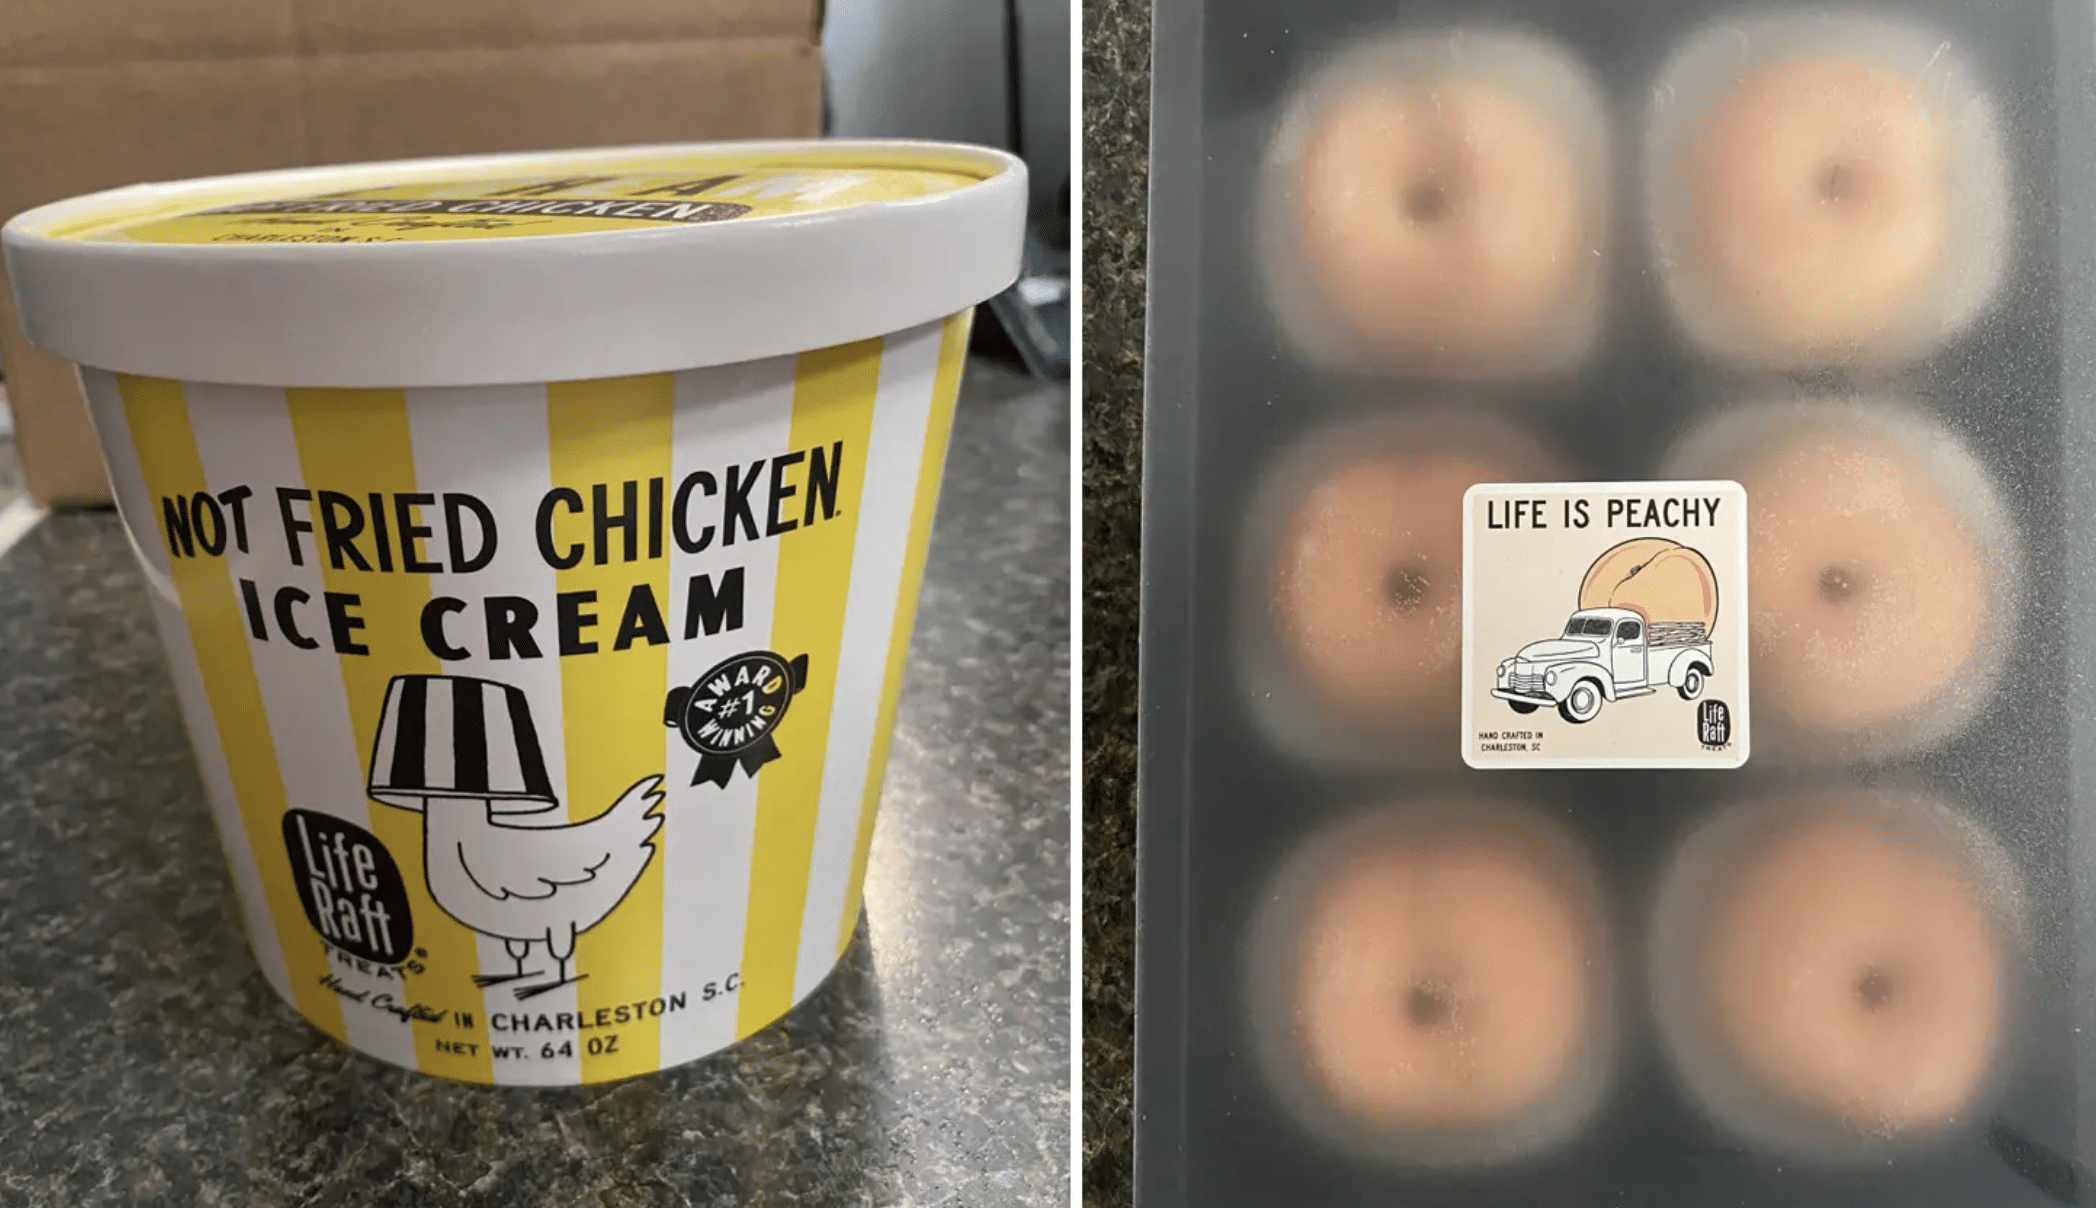 Fried Chicken Ice Cream Recalled for Listeria Risk